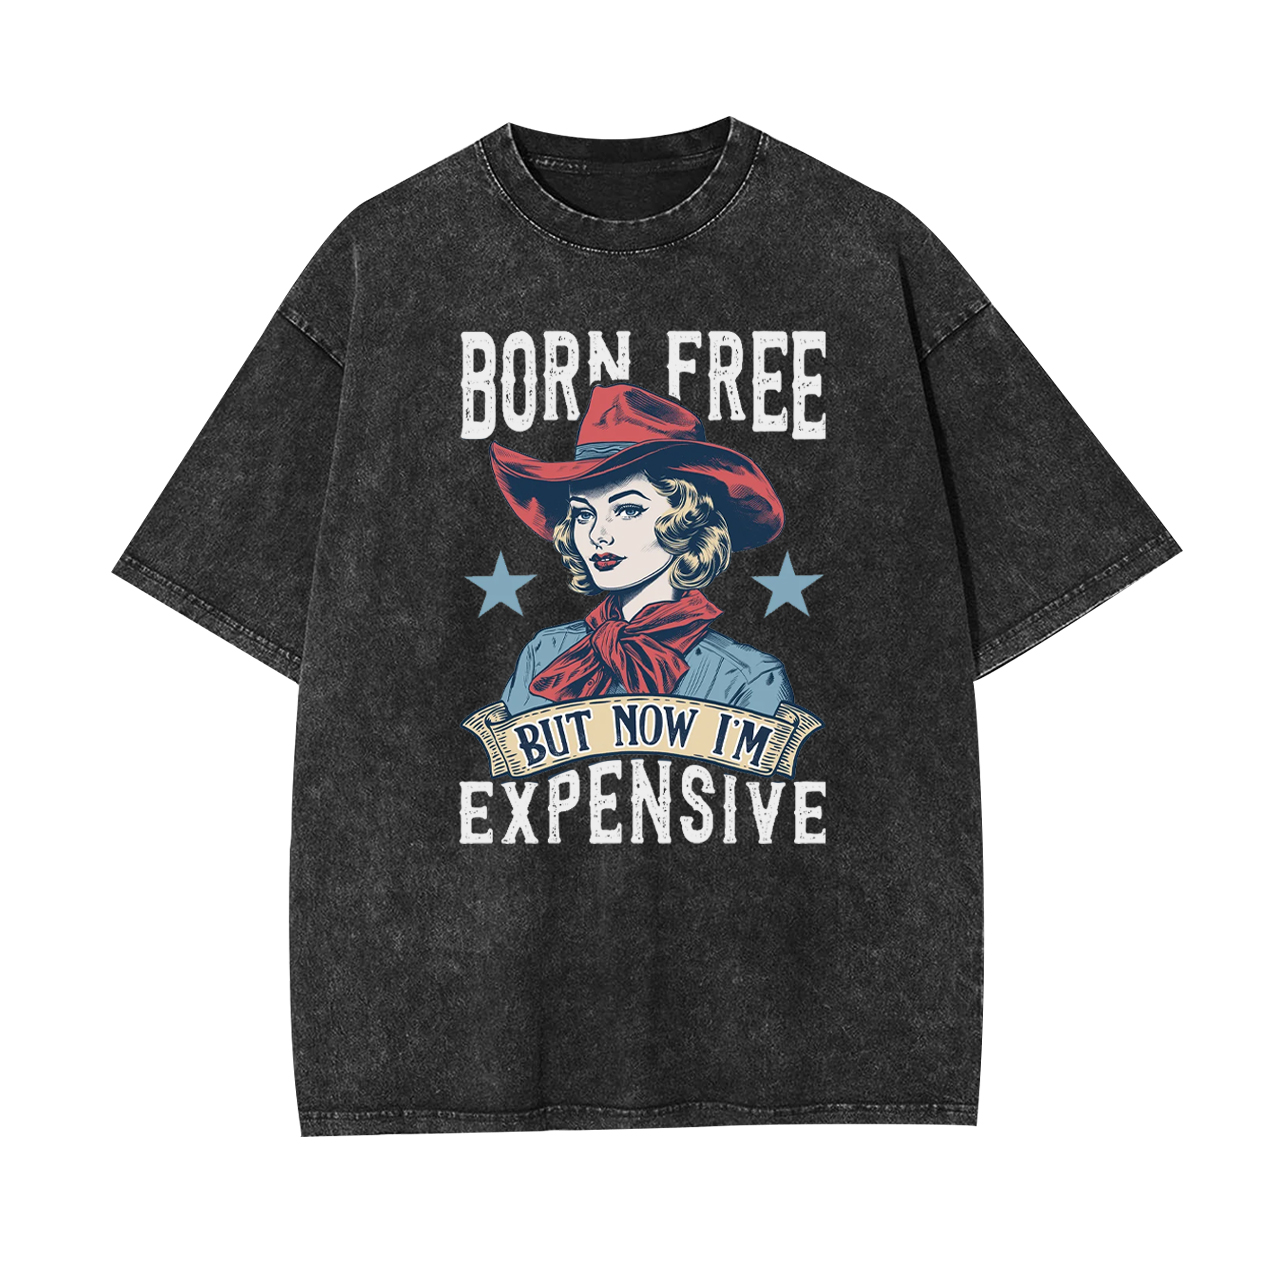 Born Free But Now I'm Expensive Garment-dye Tees